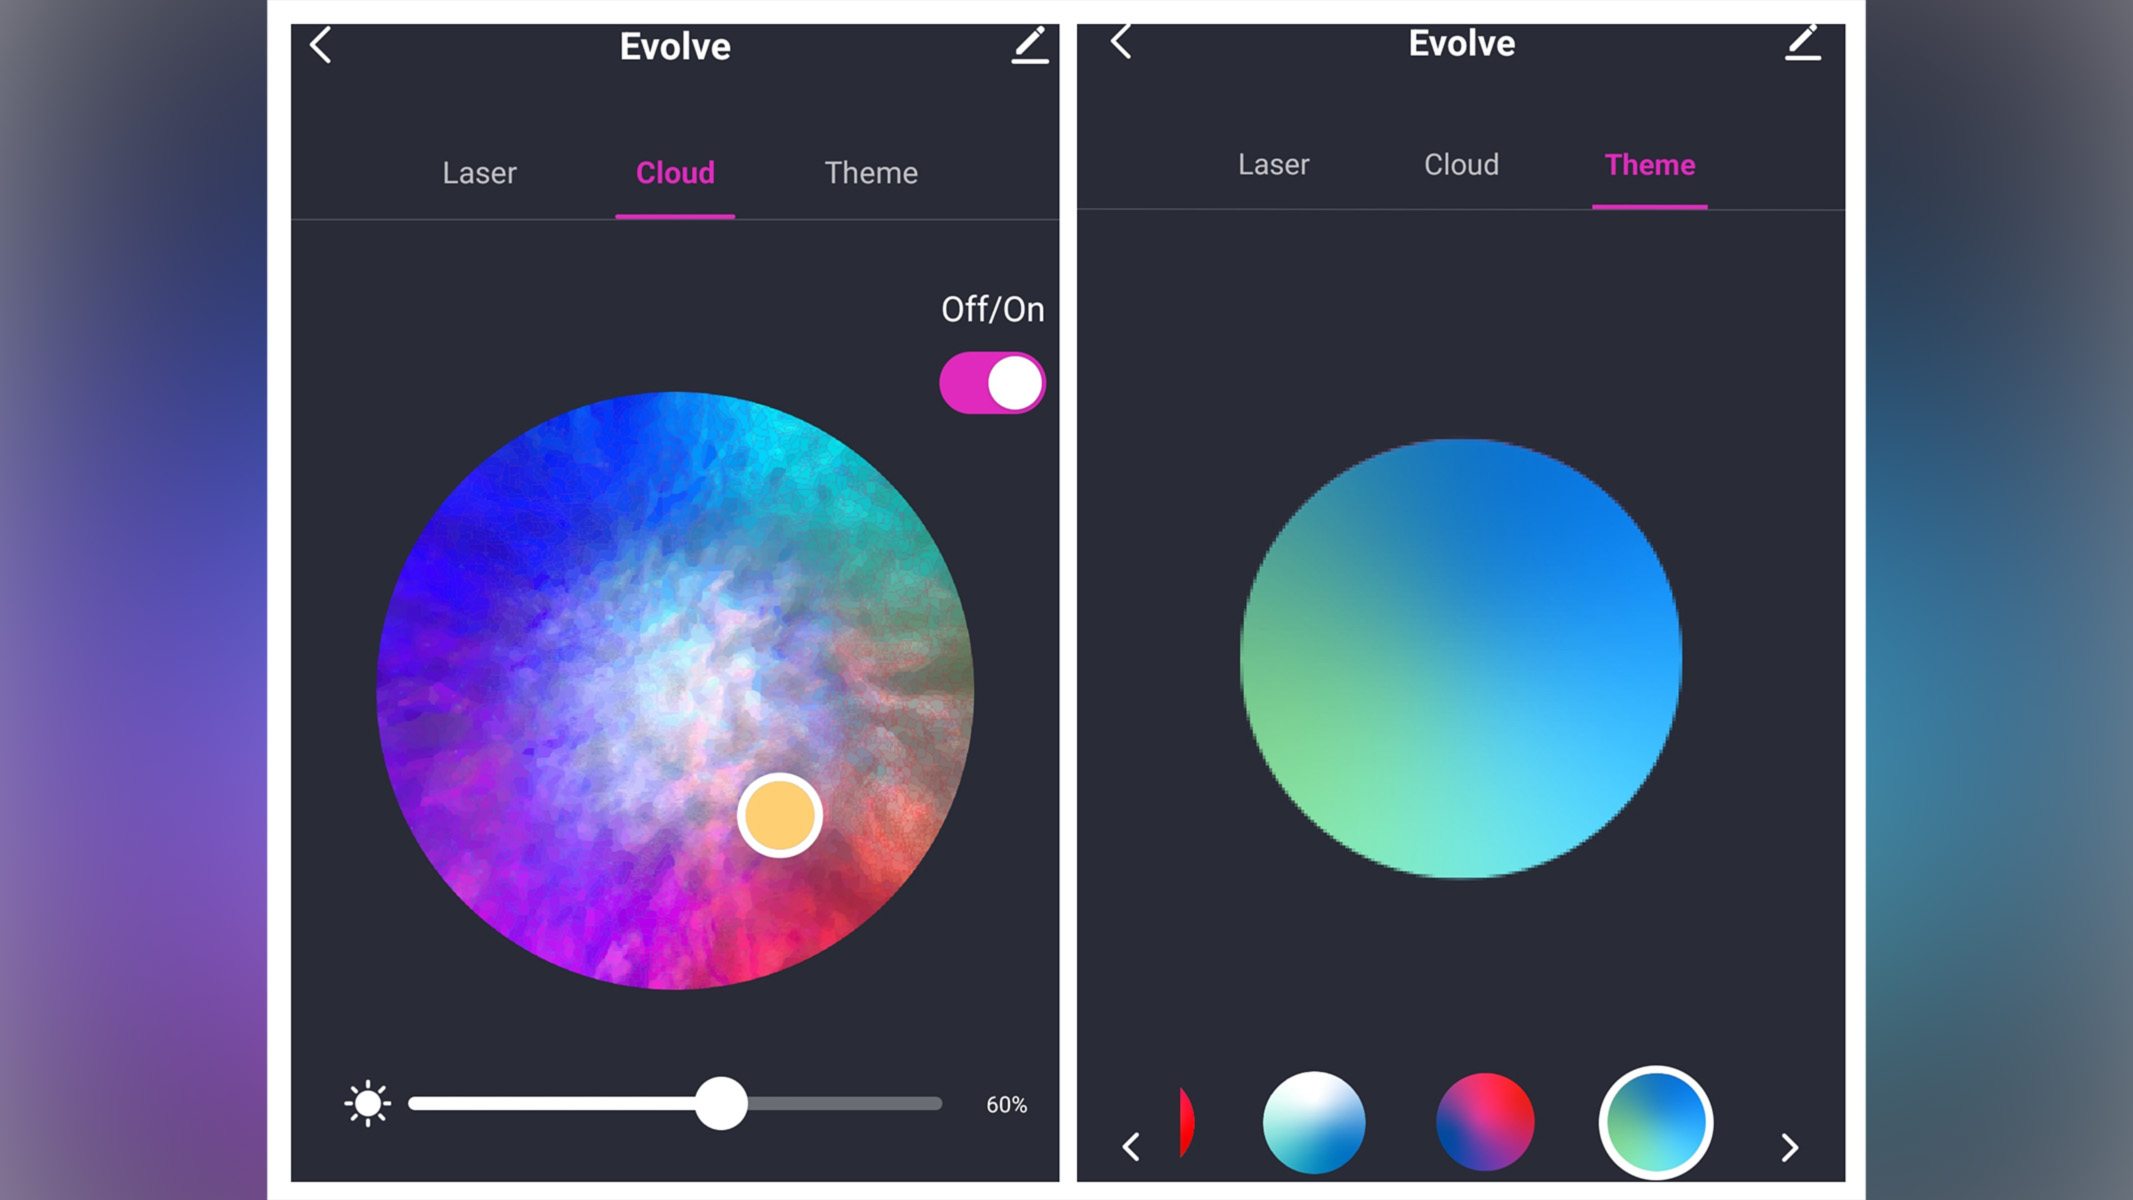 Two screenshots from the BlissLights app showing how the color and theme can be changed